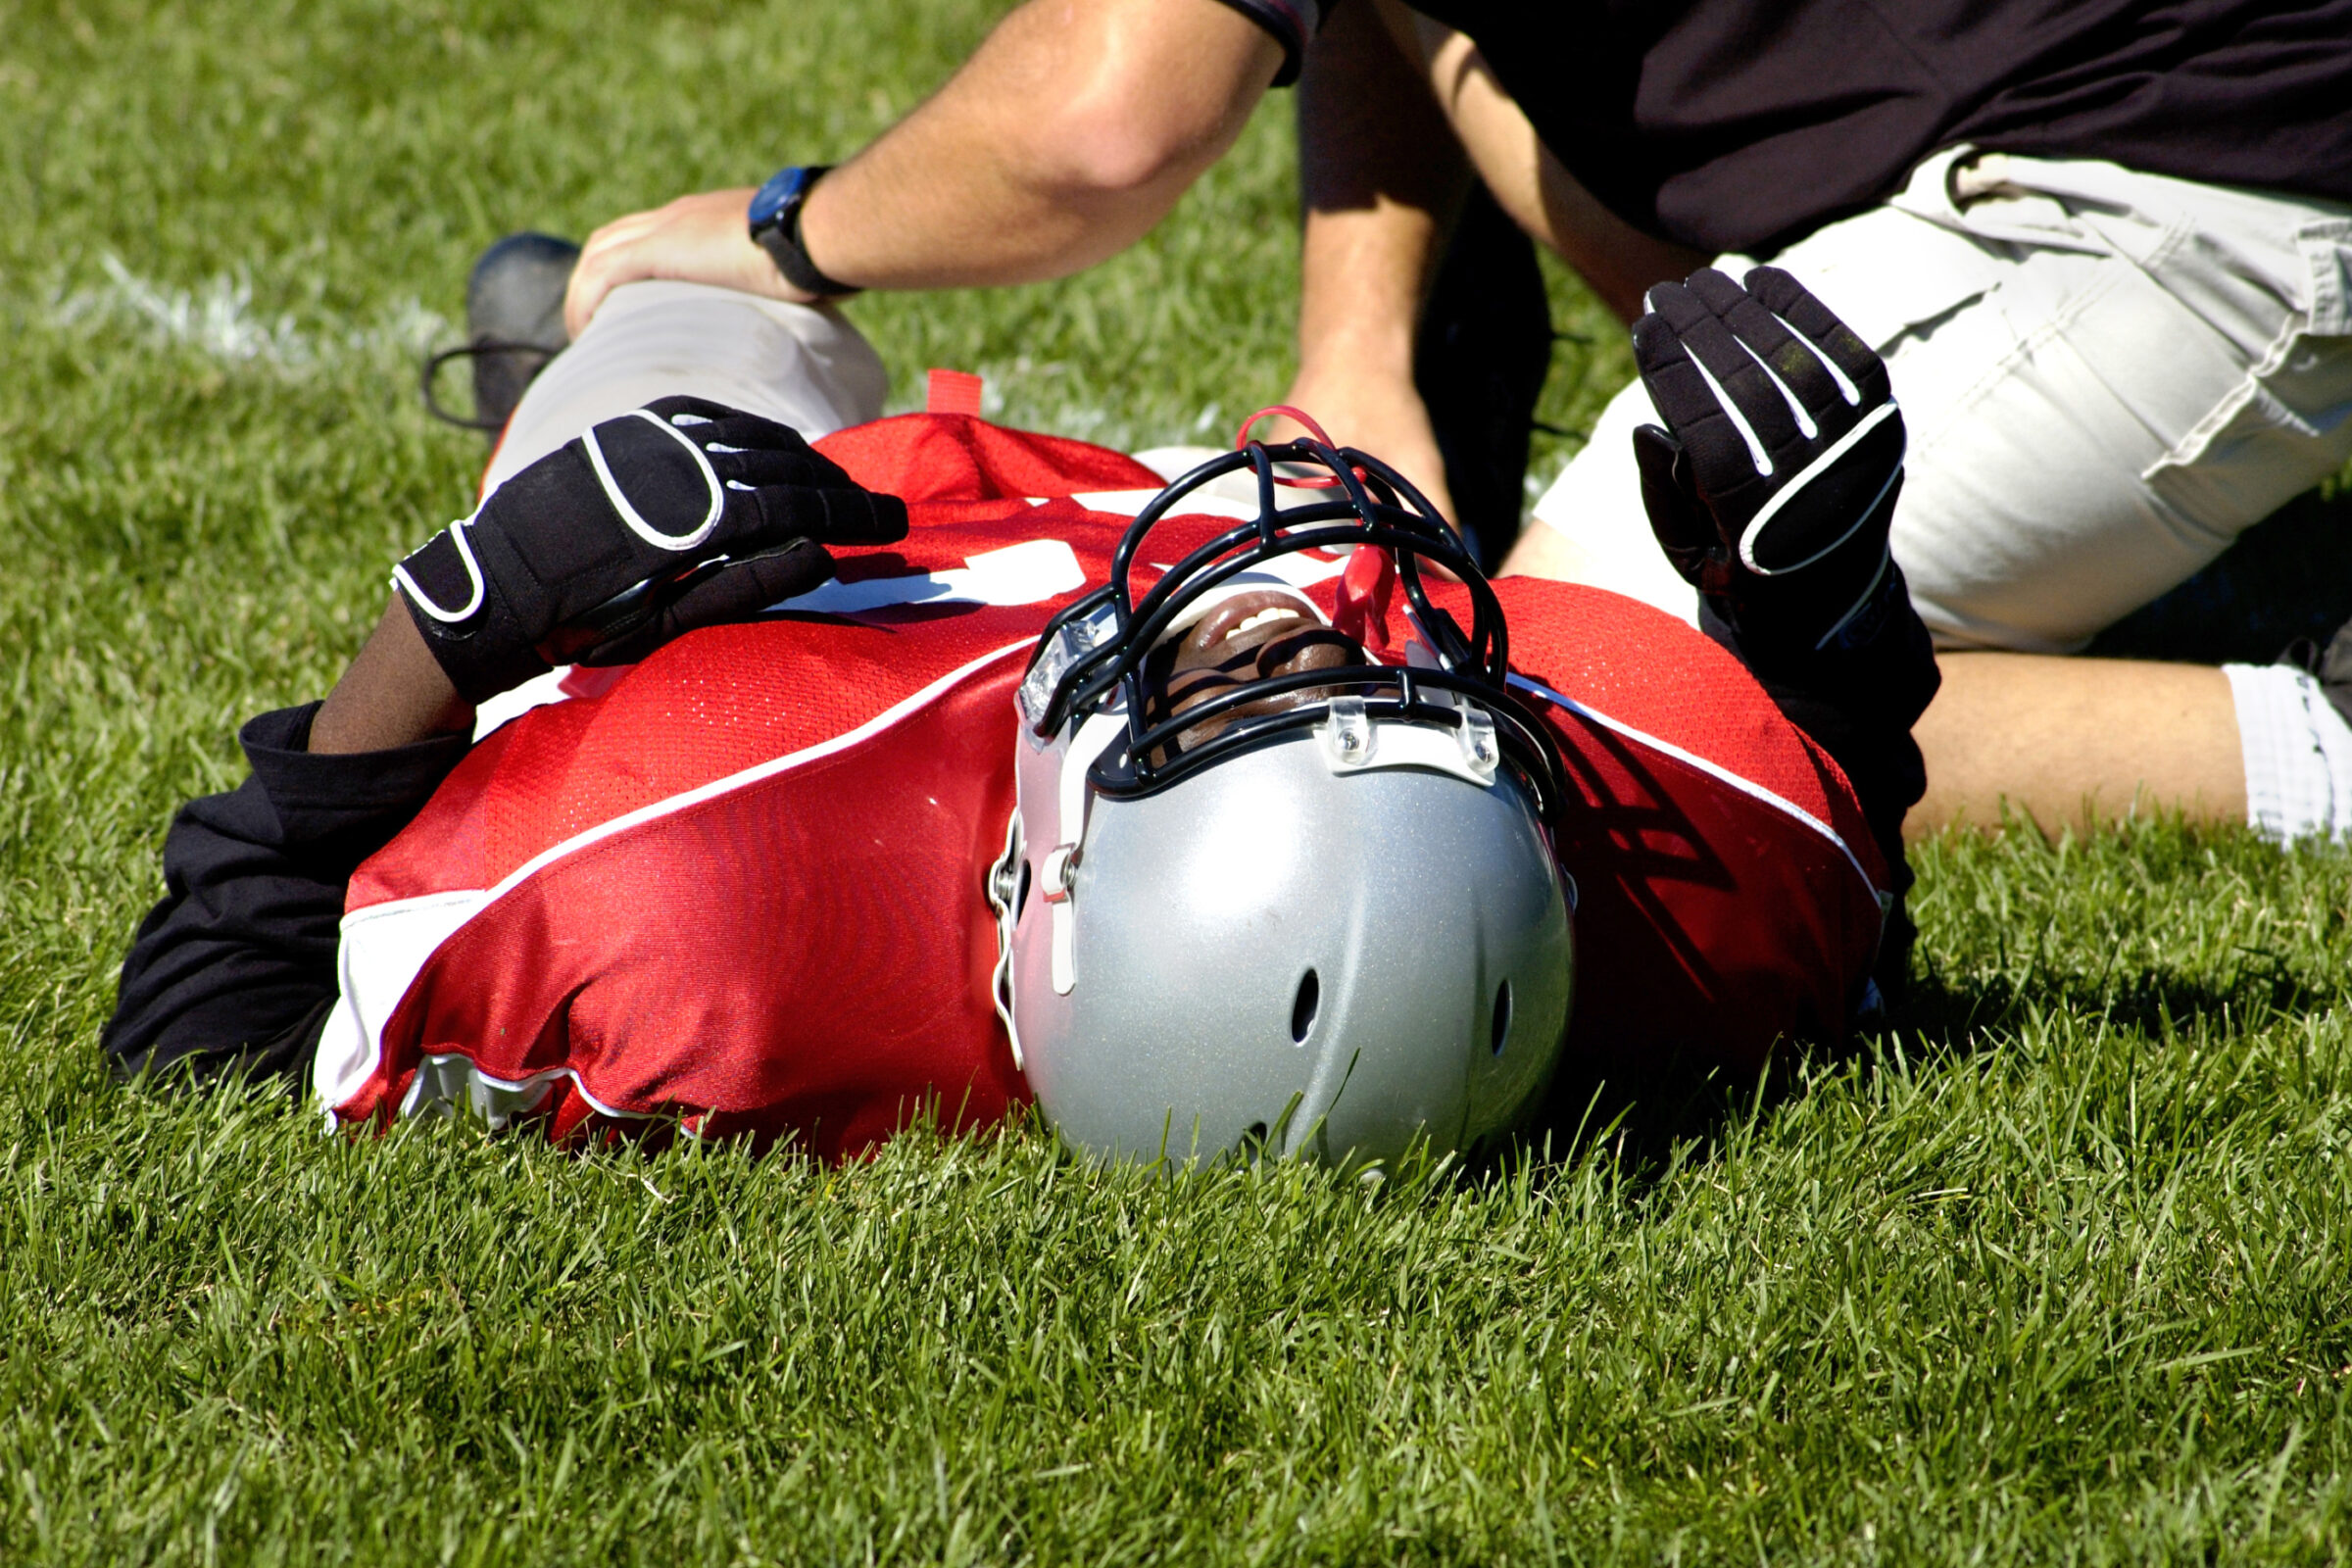 Many football coaches and trainers are now using sports analytics to help decrease the risk of common football injuries.